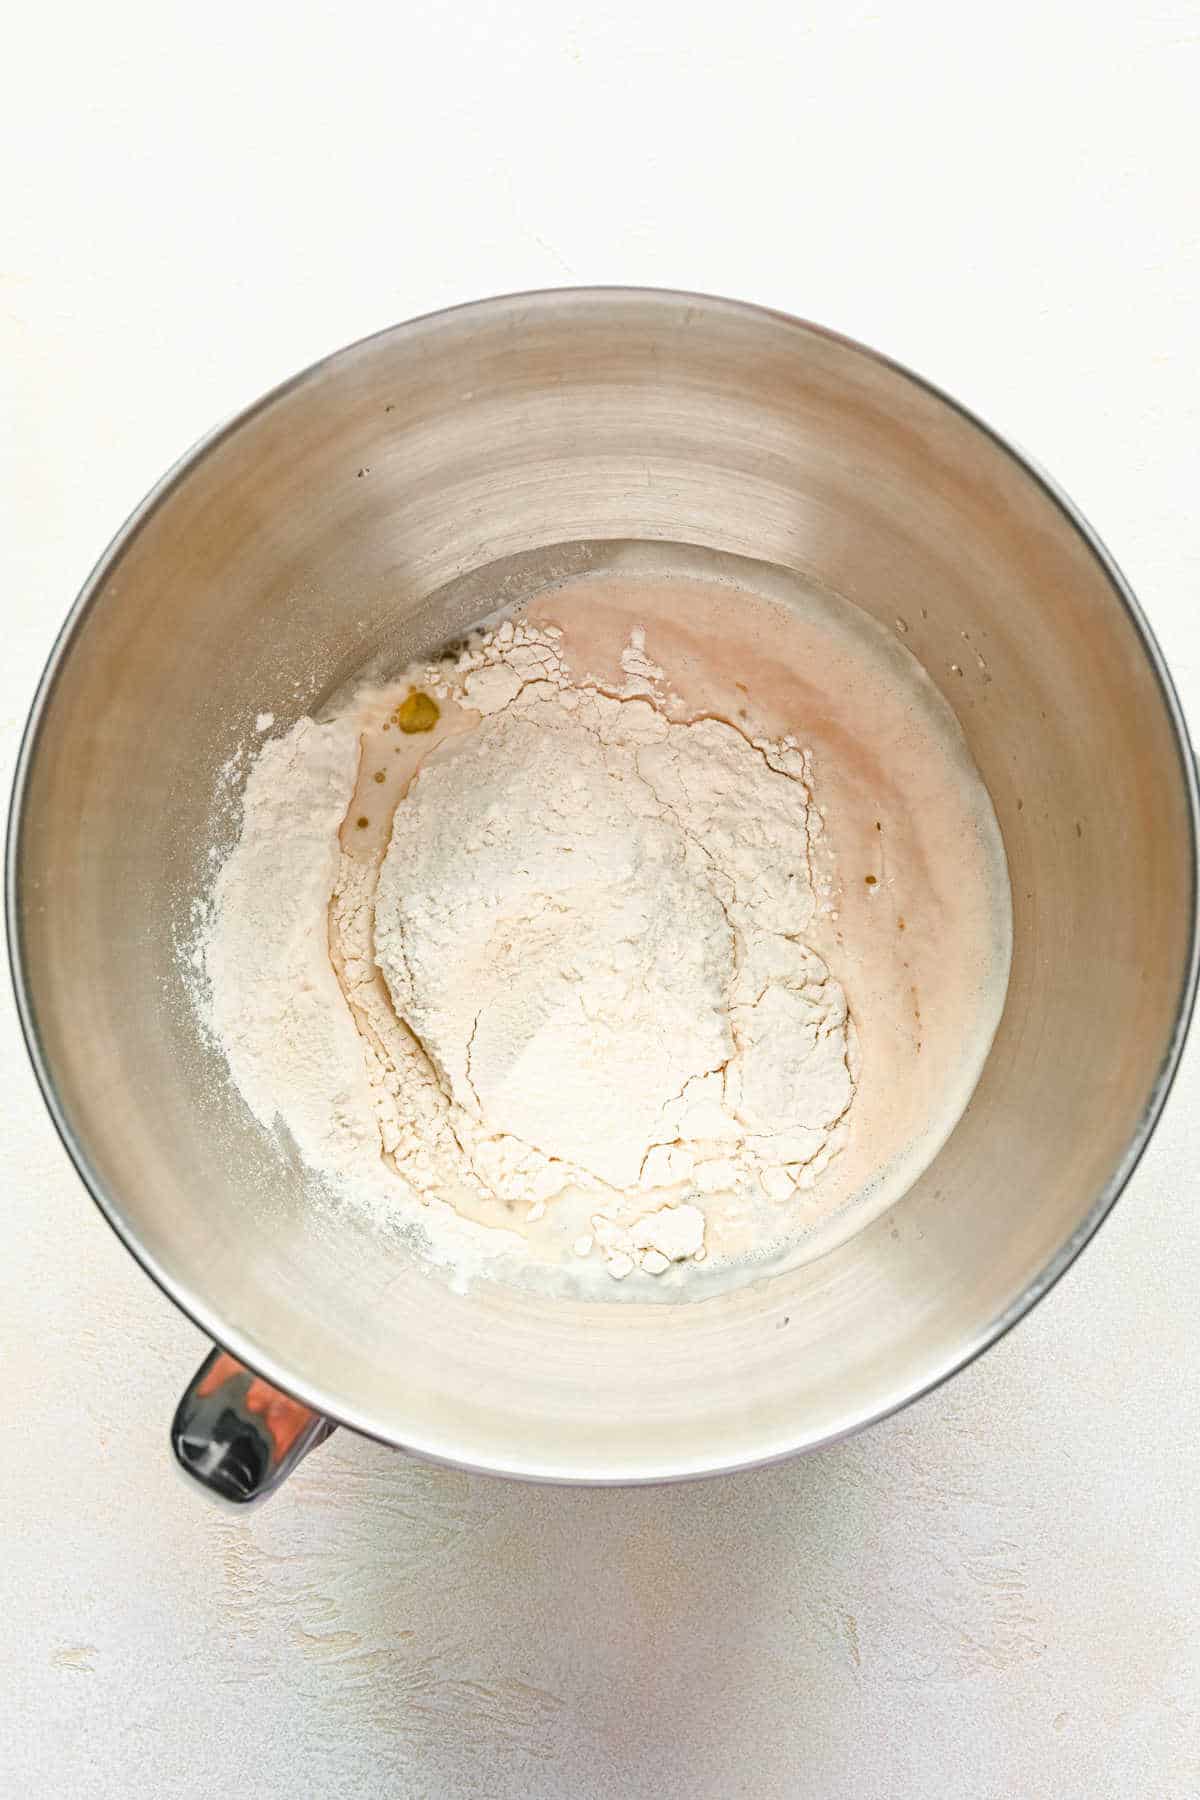 Flour salt and olive oil on top of yeast mixture in a silver mixing bowl.